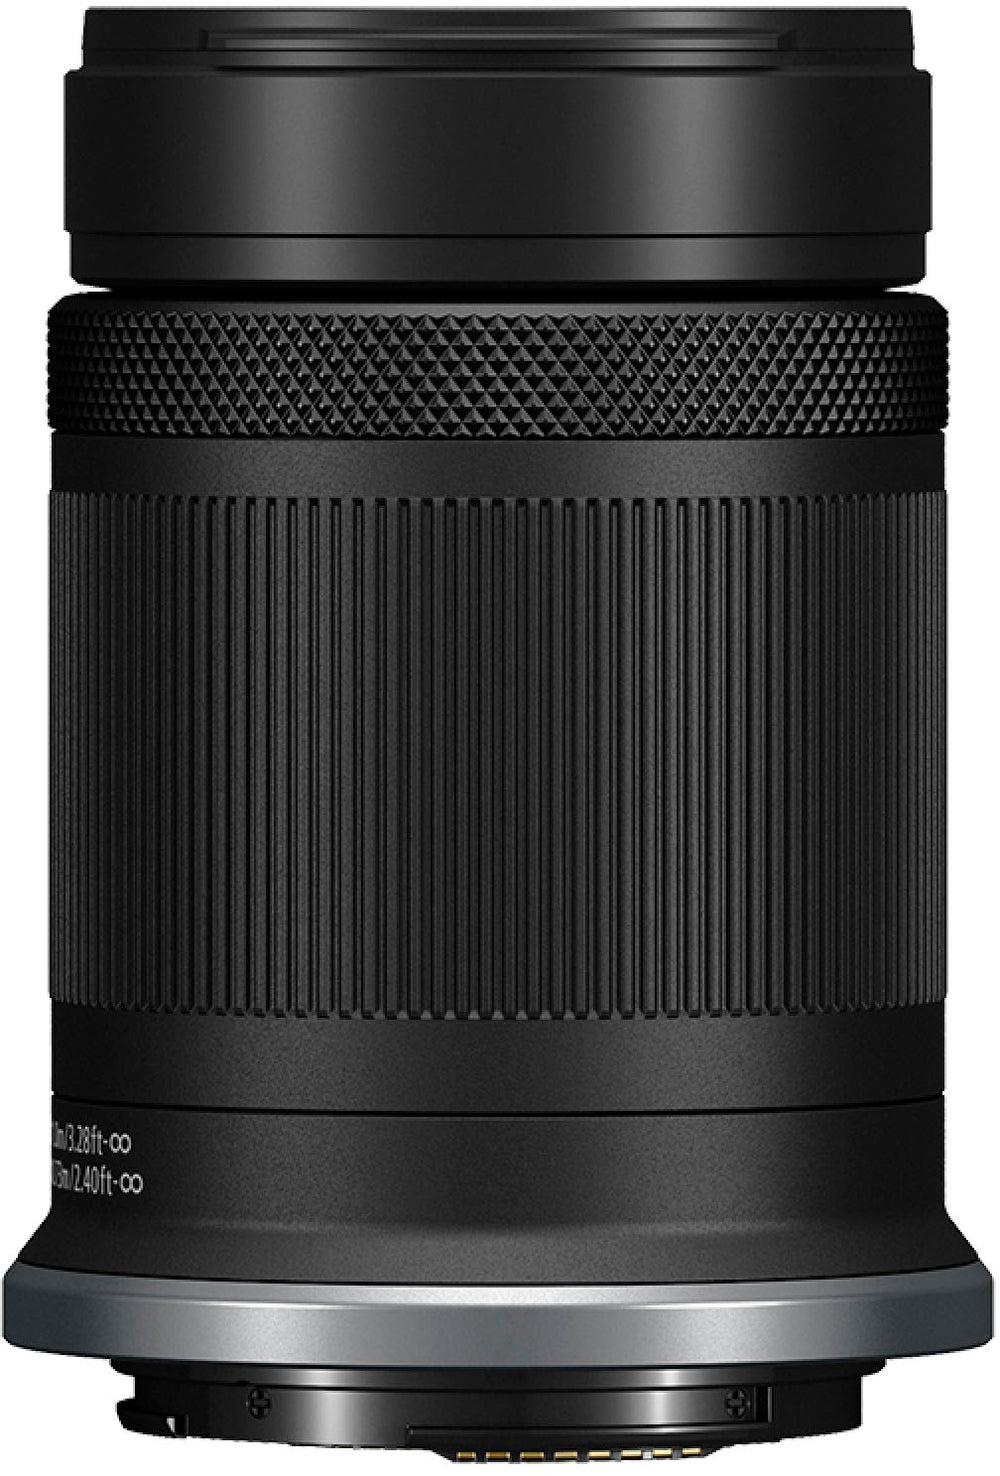 RF-S 55-210mm f/5-7.1 IS STM Telephoto Zoom Lens for Canon RF Mount Cameras - Black_1